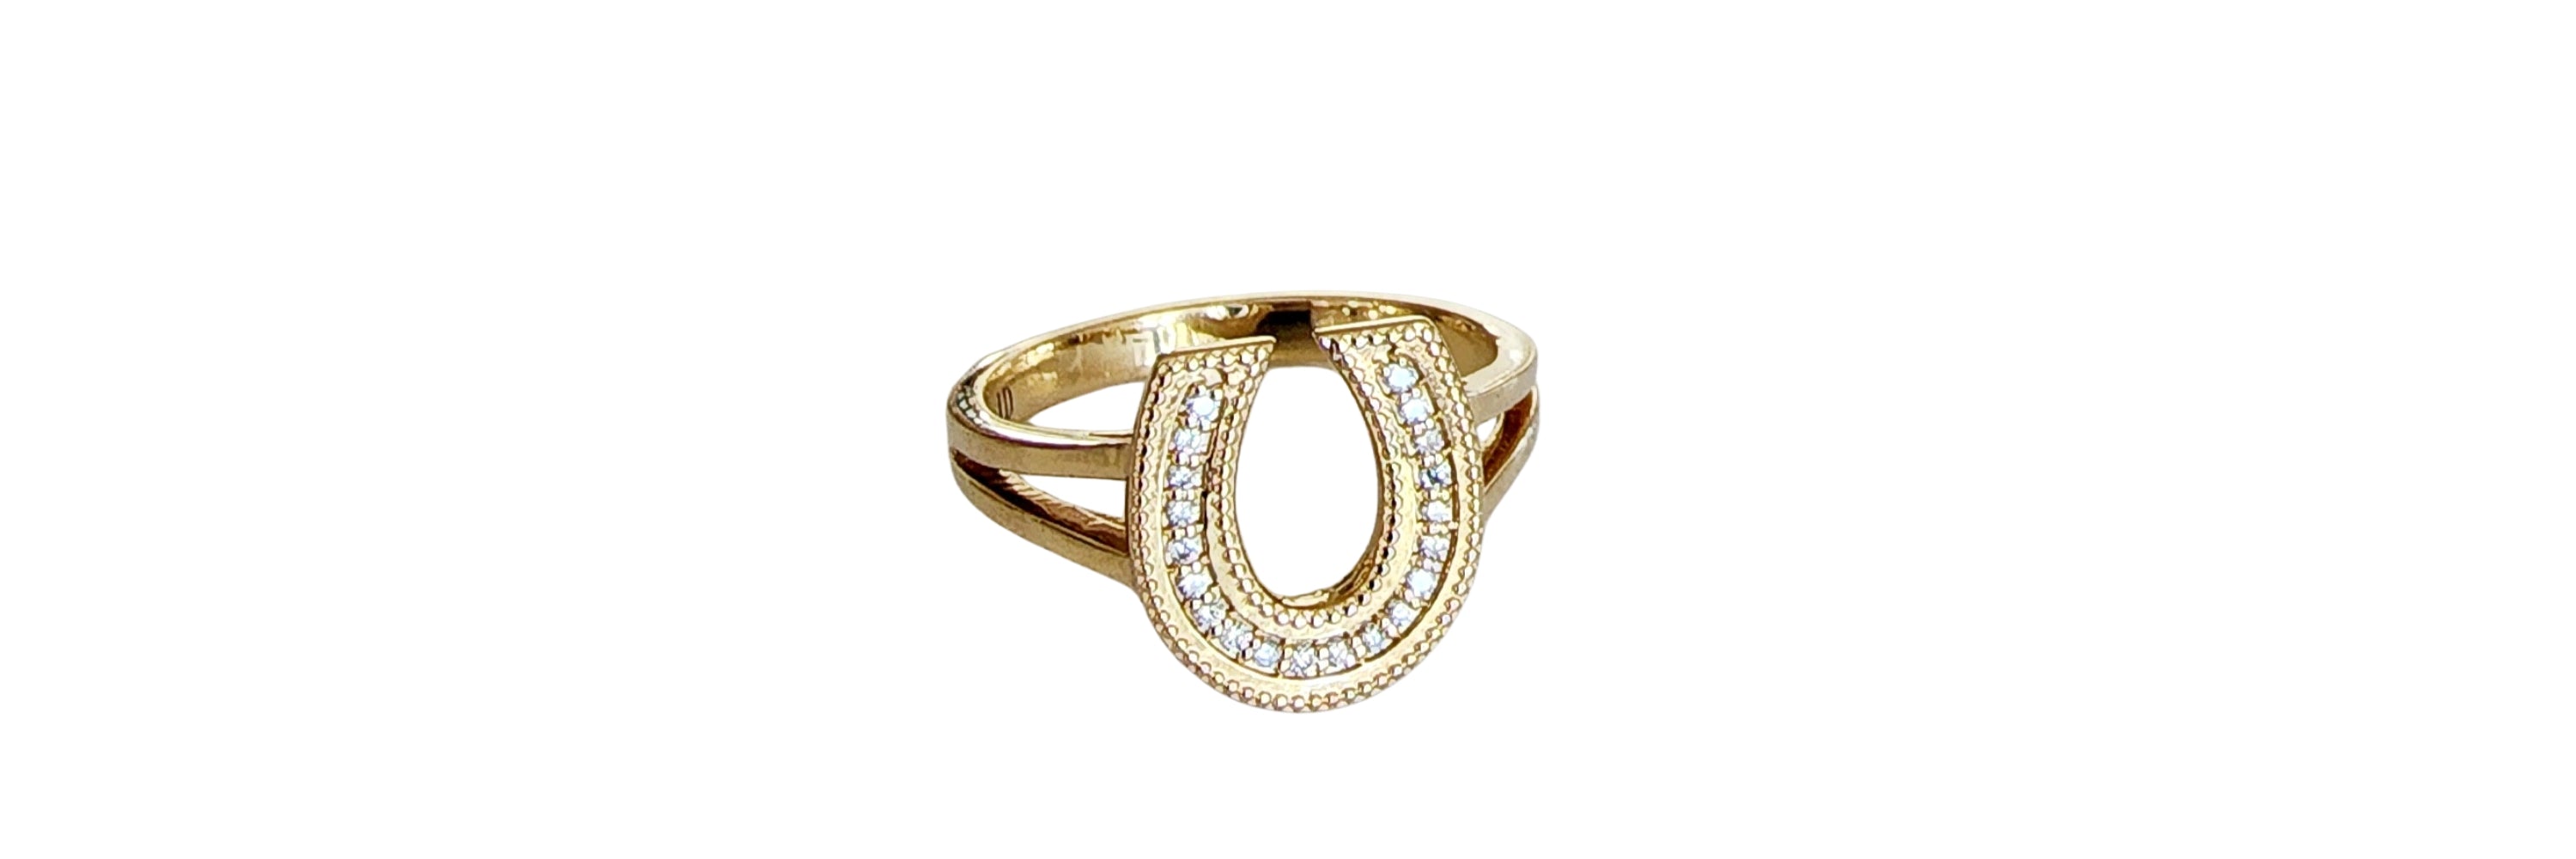 Equestrian style jewelry with a collection of horseshoe and diamonds 